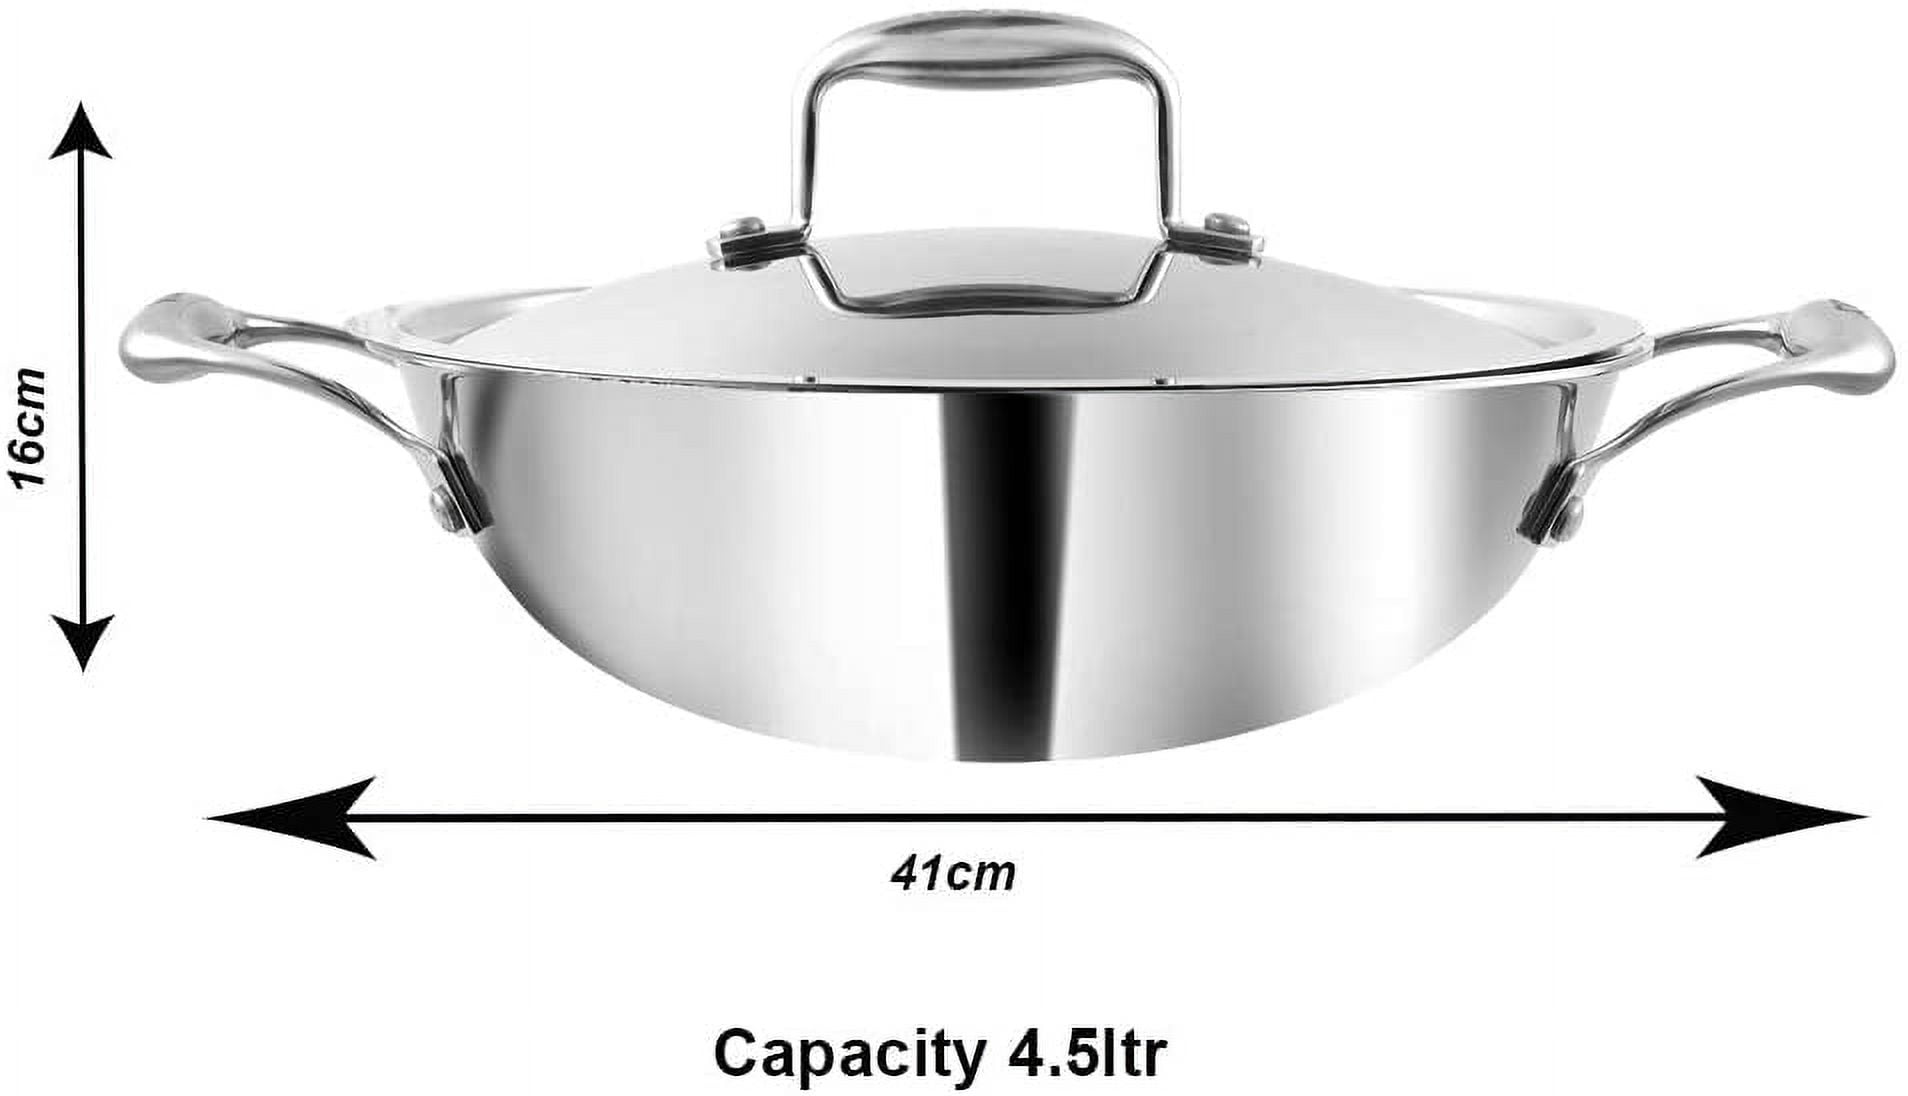 Vinod Platinum Kadai Triply Stainless Steel | Suitable For Indian Cooking,  Sauces, Stews, Soups | Deep/Extra Deep Kadai With Lid | Induction, Electric